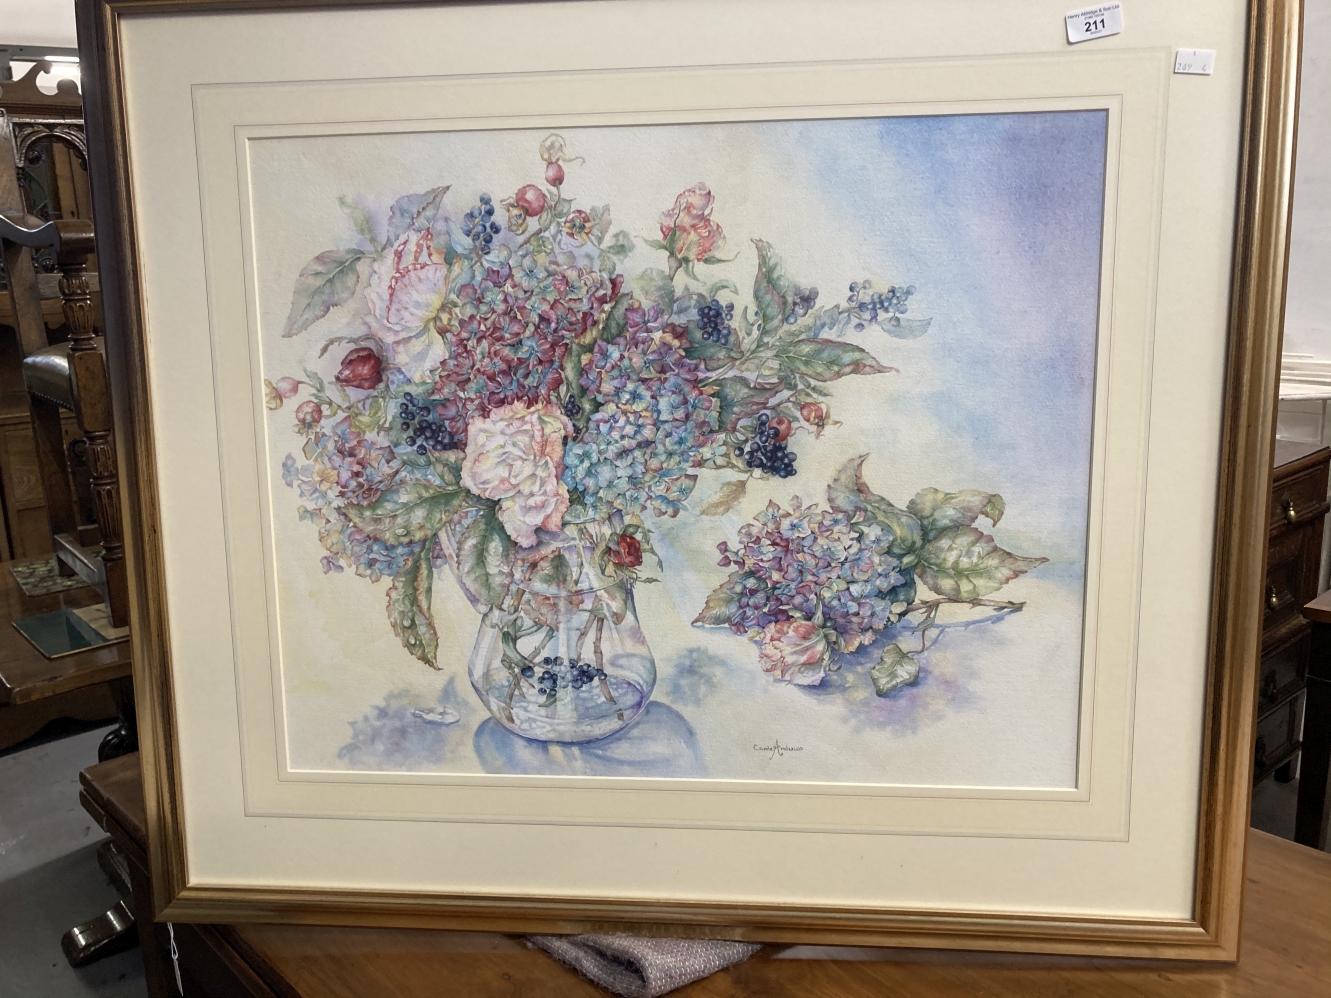 Carole Andrews (1962): Late 20th cent. Watercolour on paper, still life 'Hydrangeas and Roses '.